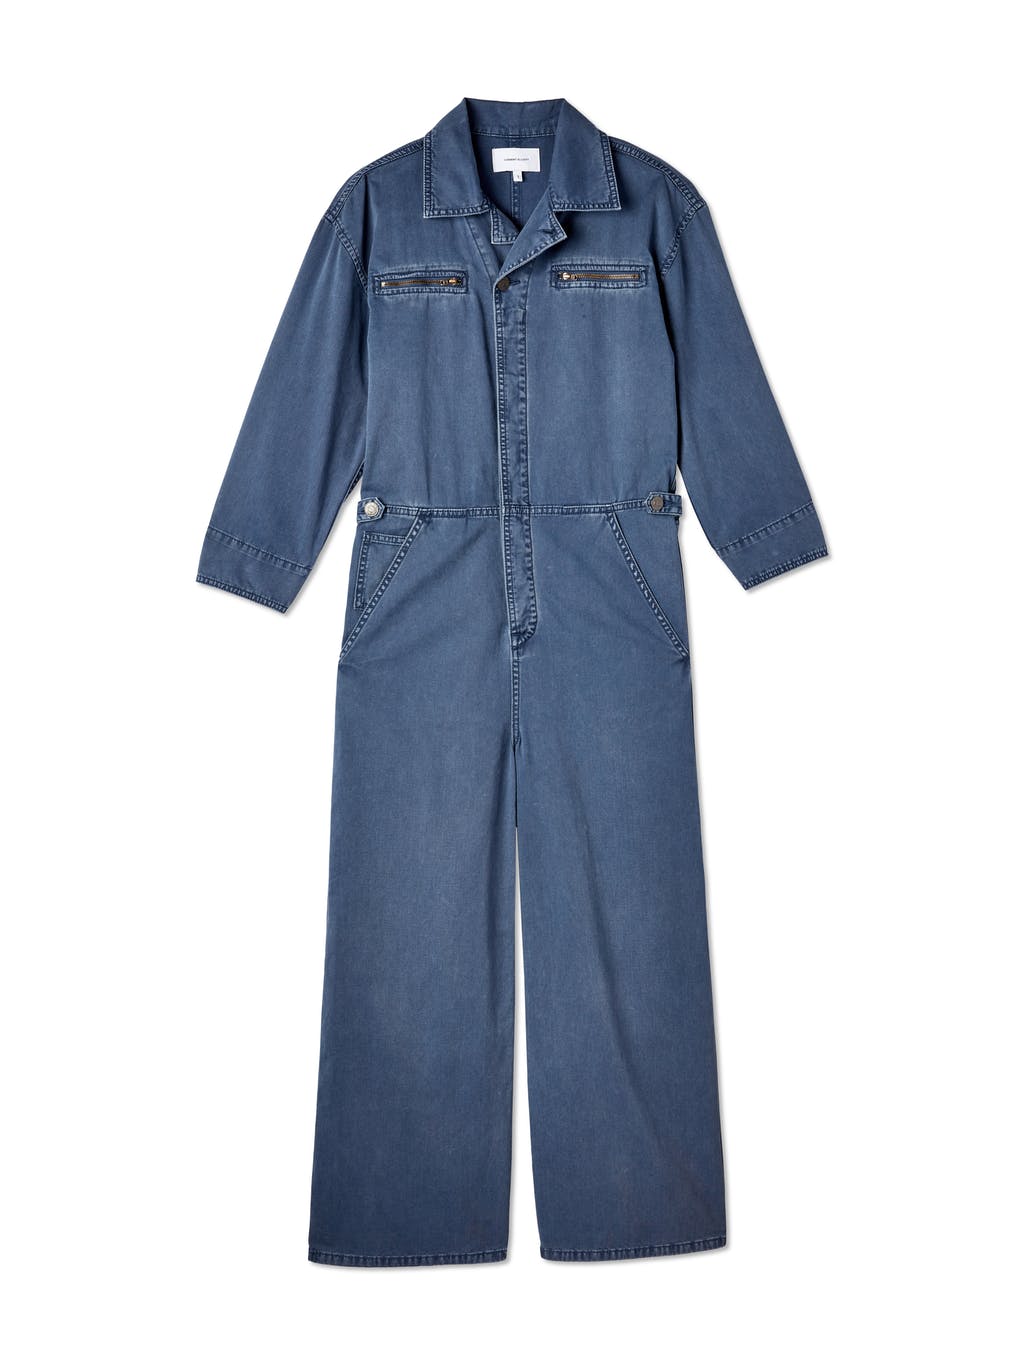 The Penny Coverall